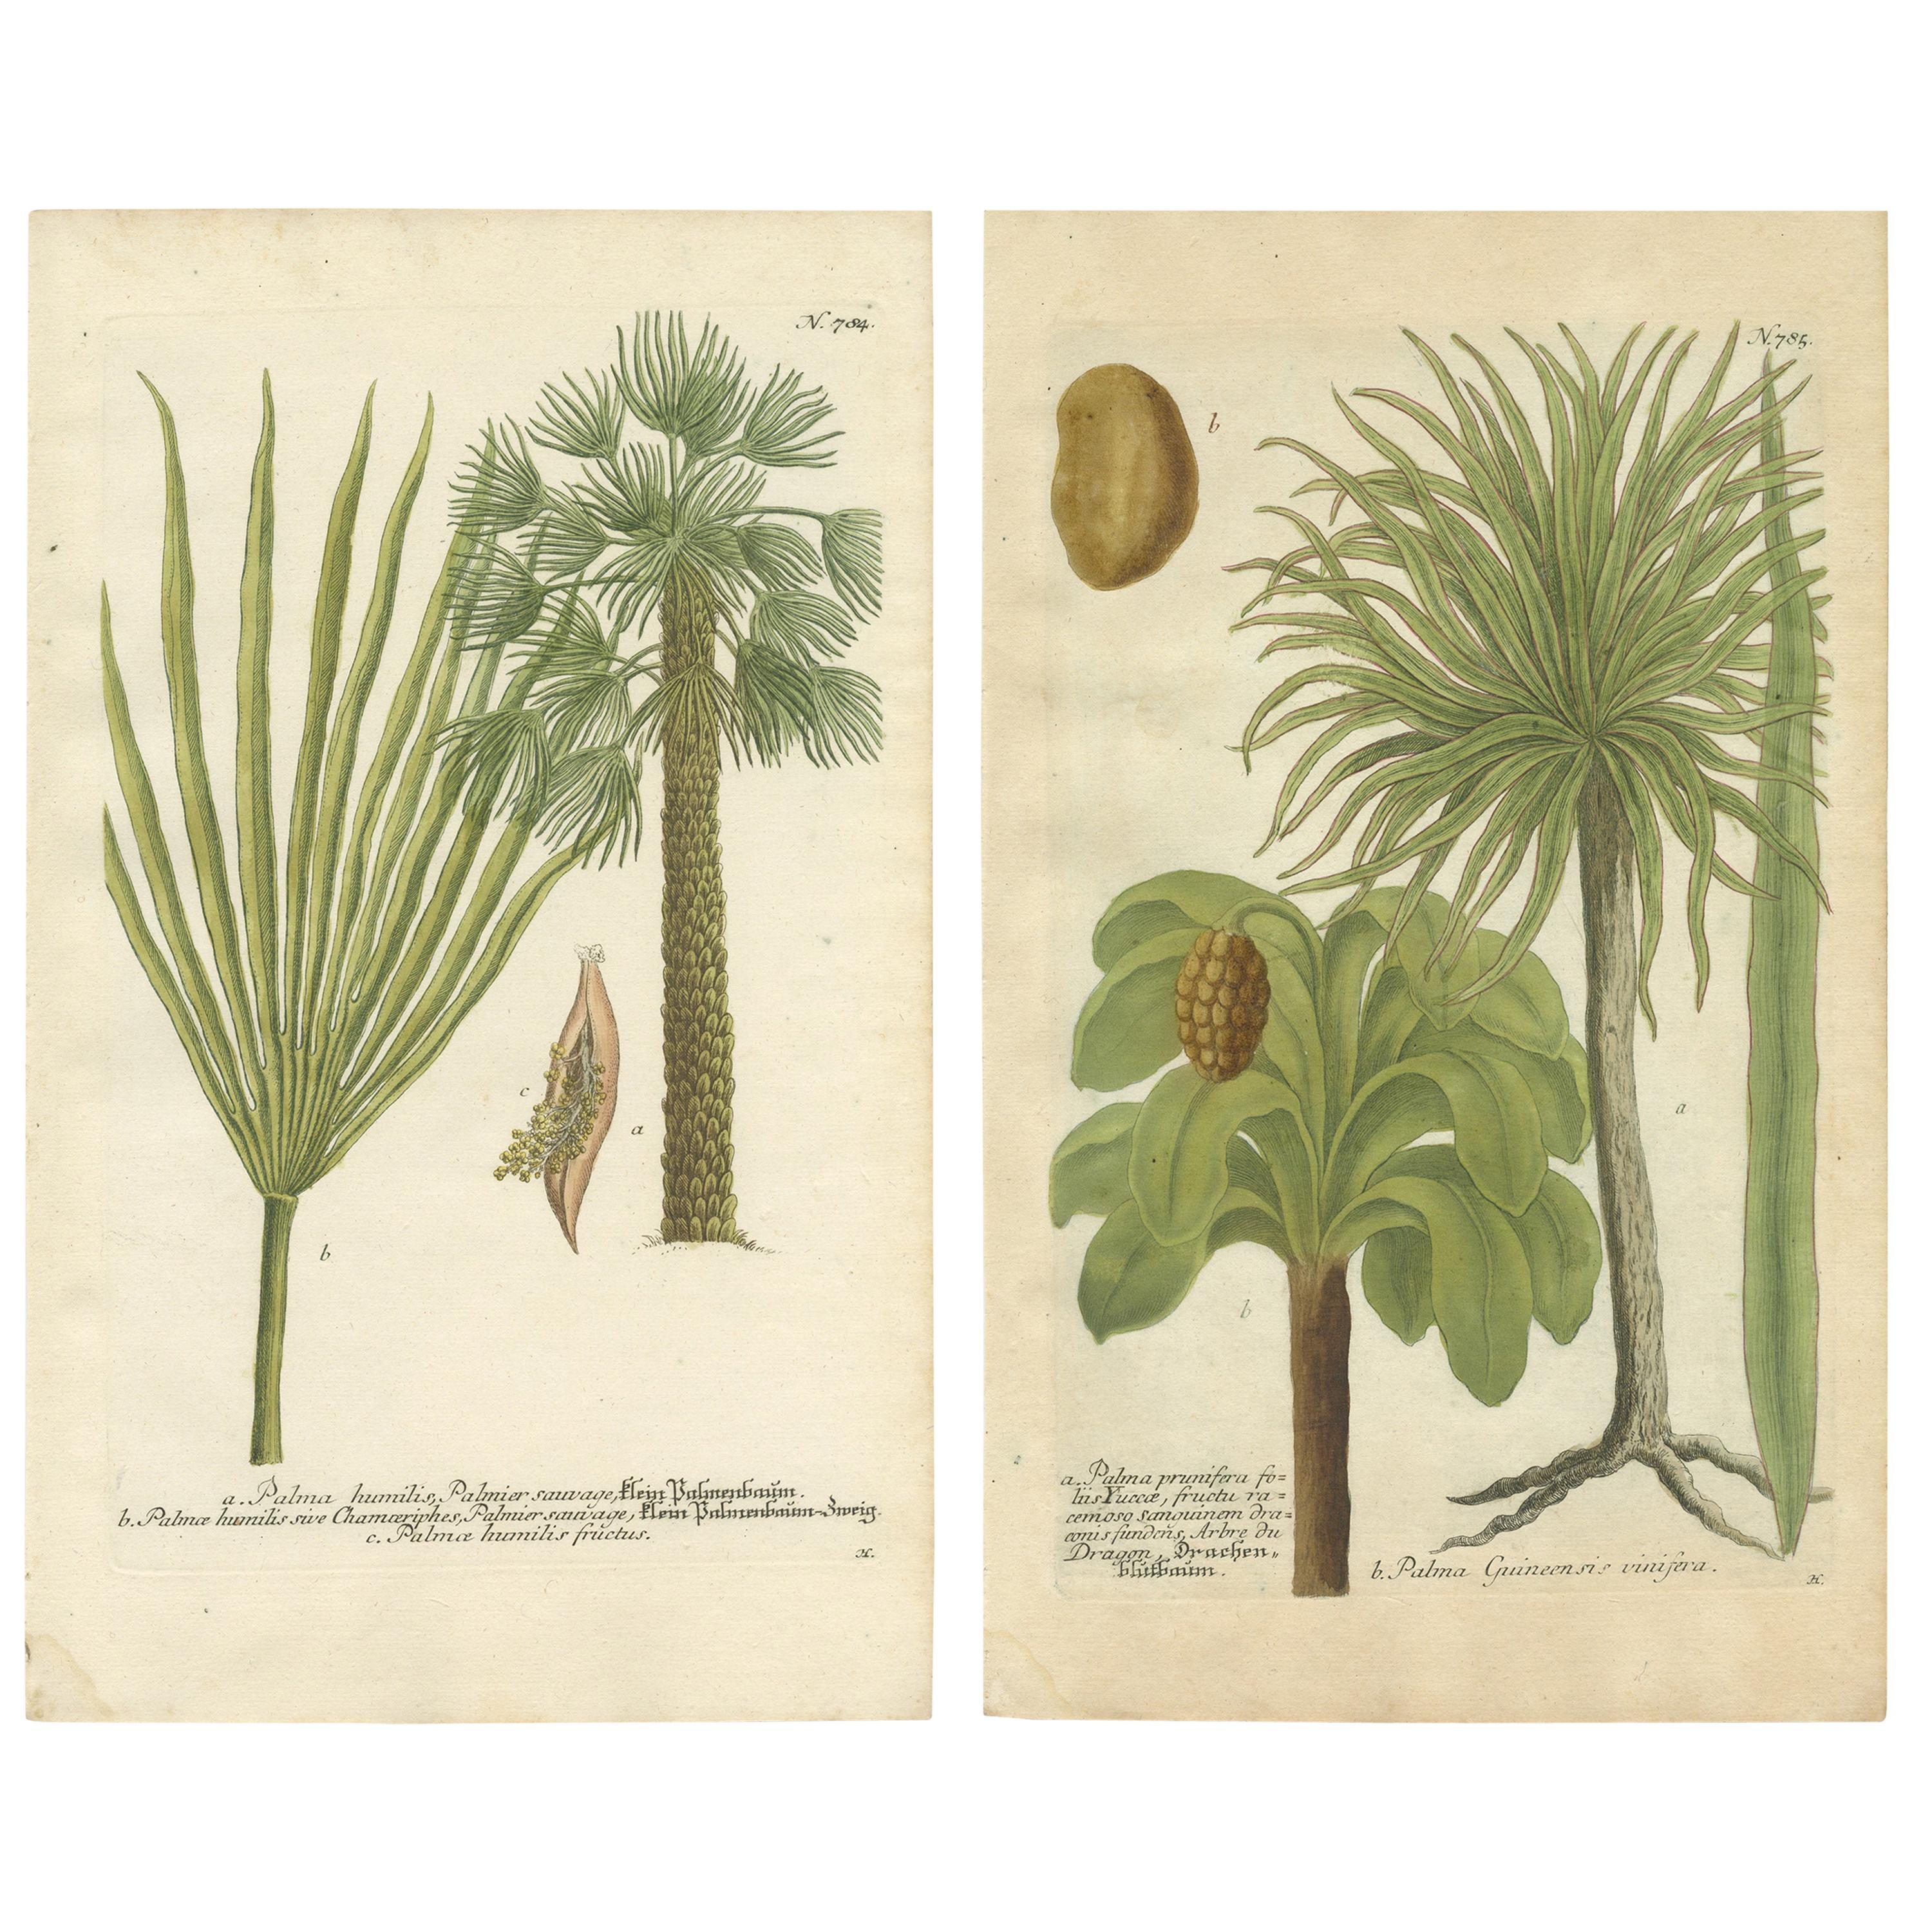 Set of 2 Antique Botany Prints of the European Fan Palm and Copernicia Prunifera